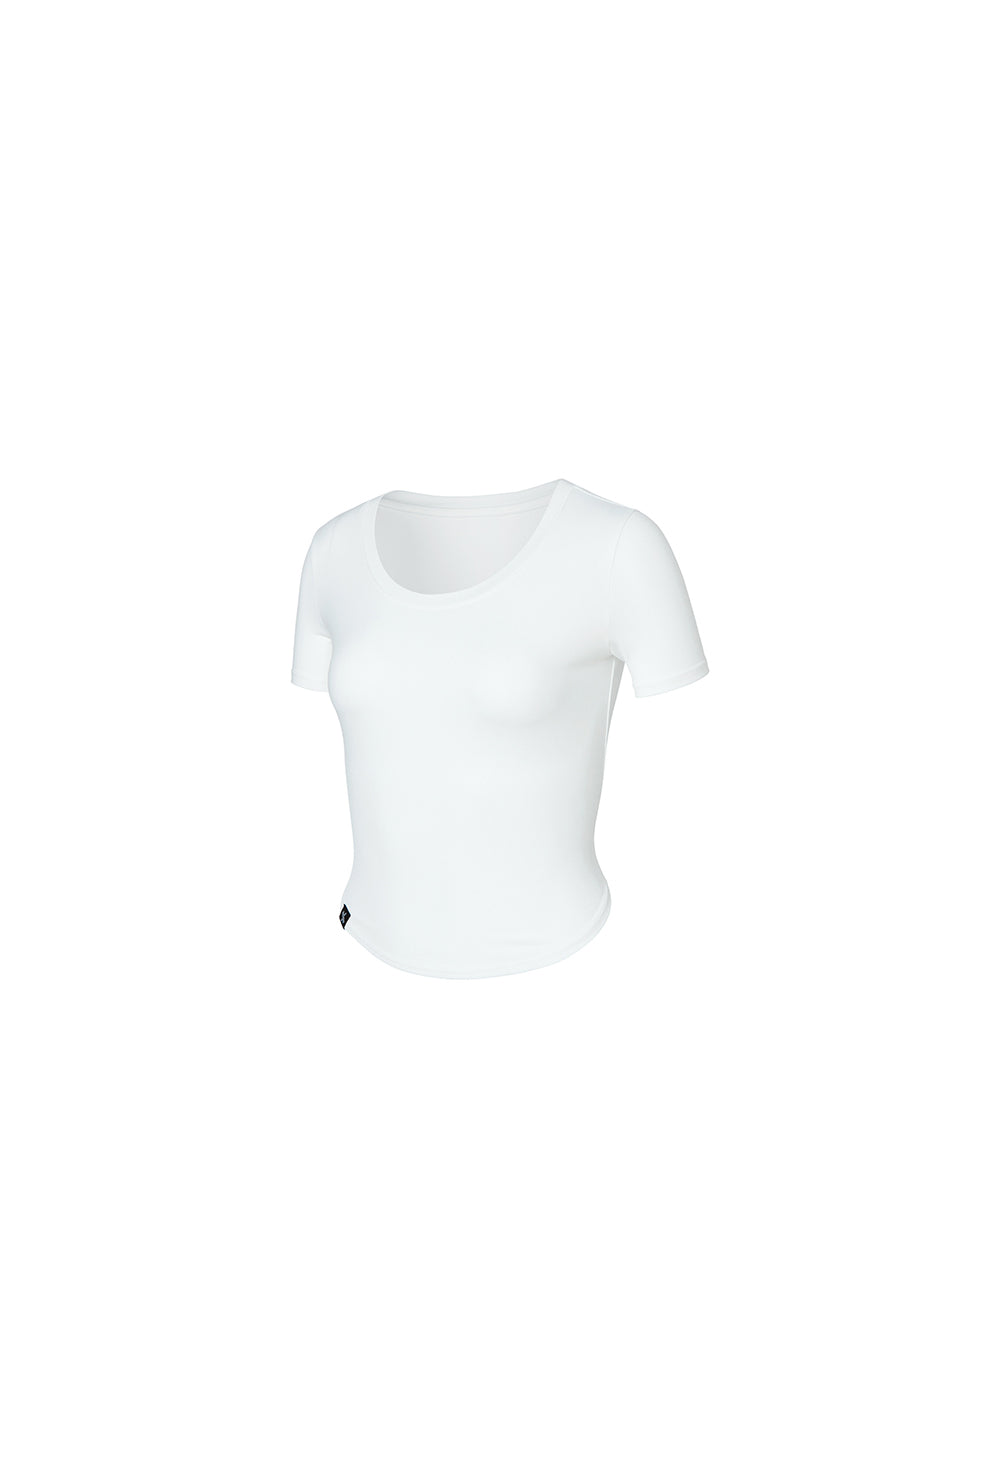 XELLA Light Round Crop Top - Ivory (Clearance)